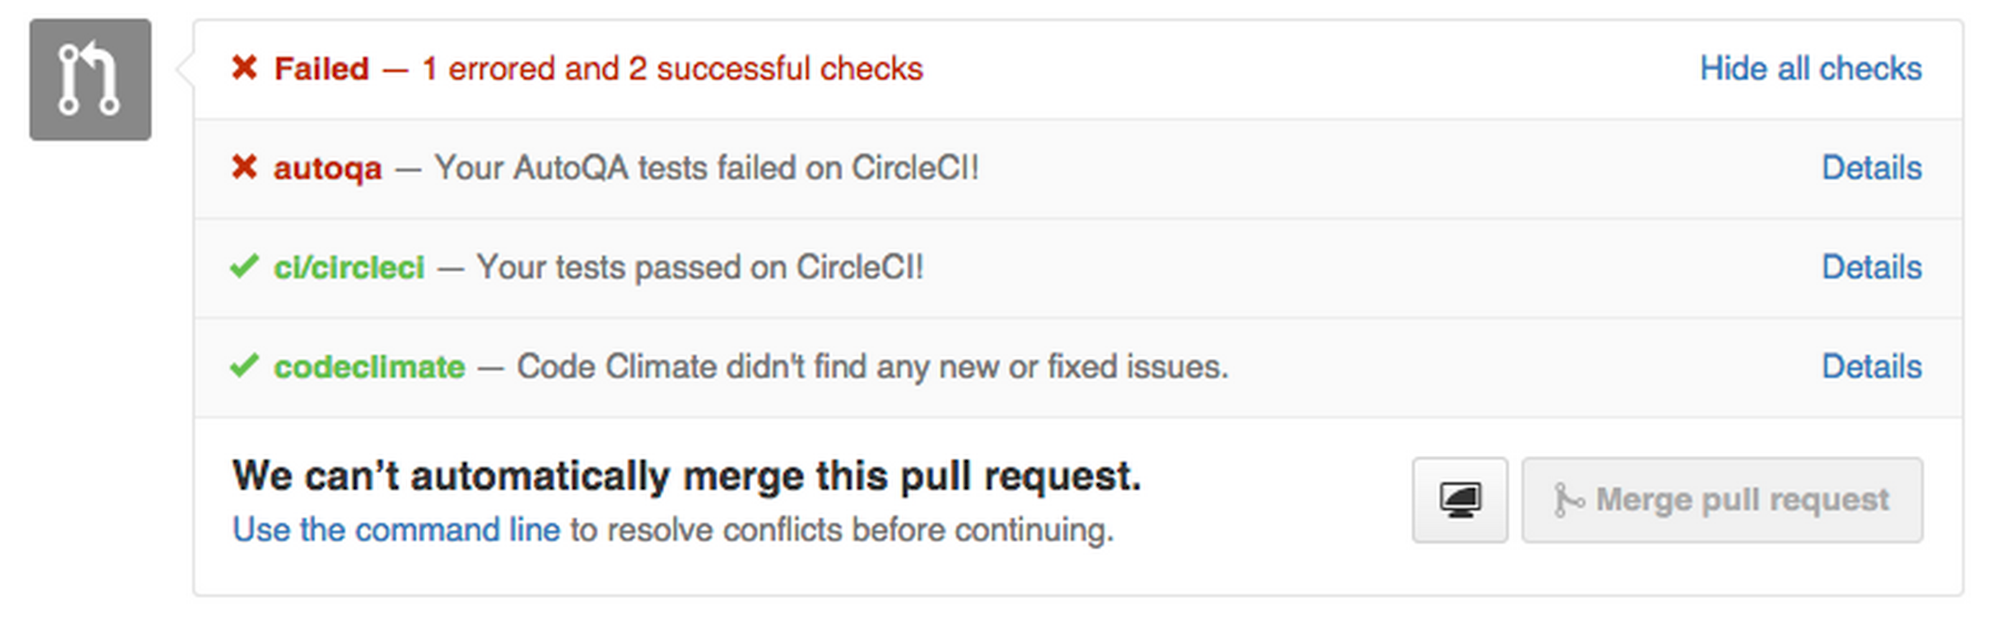 Screenshot of failed and passed checks on a pull request